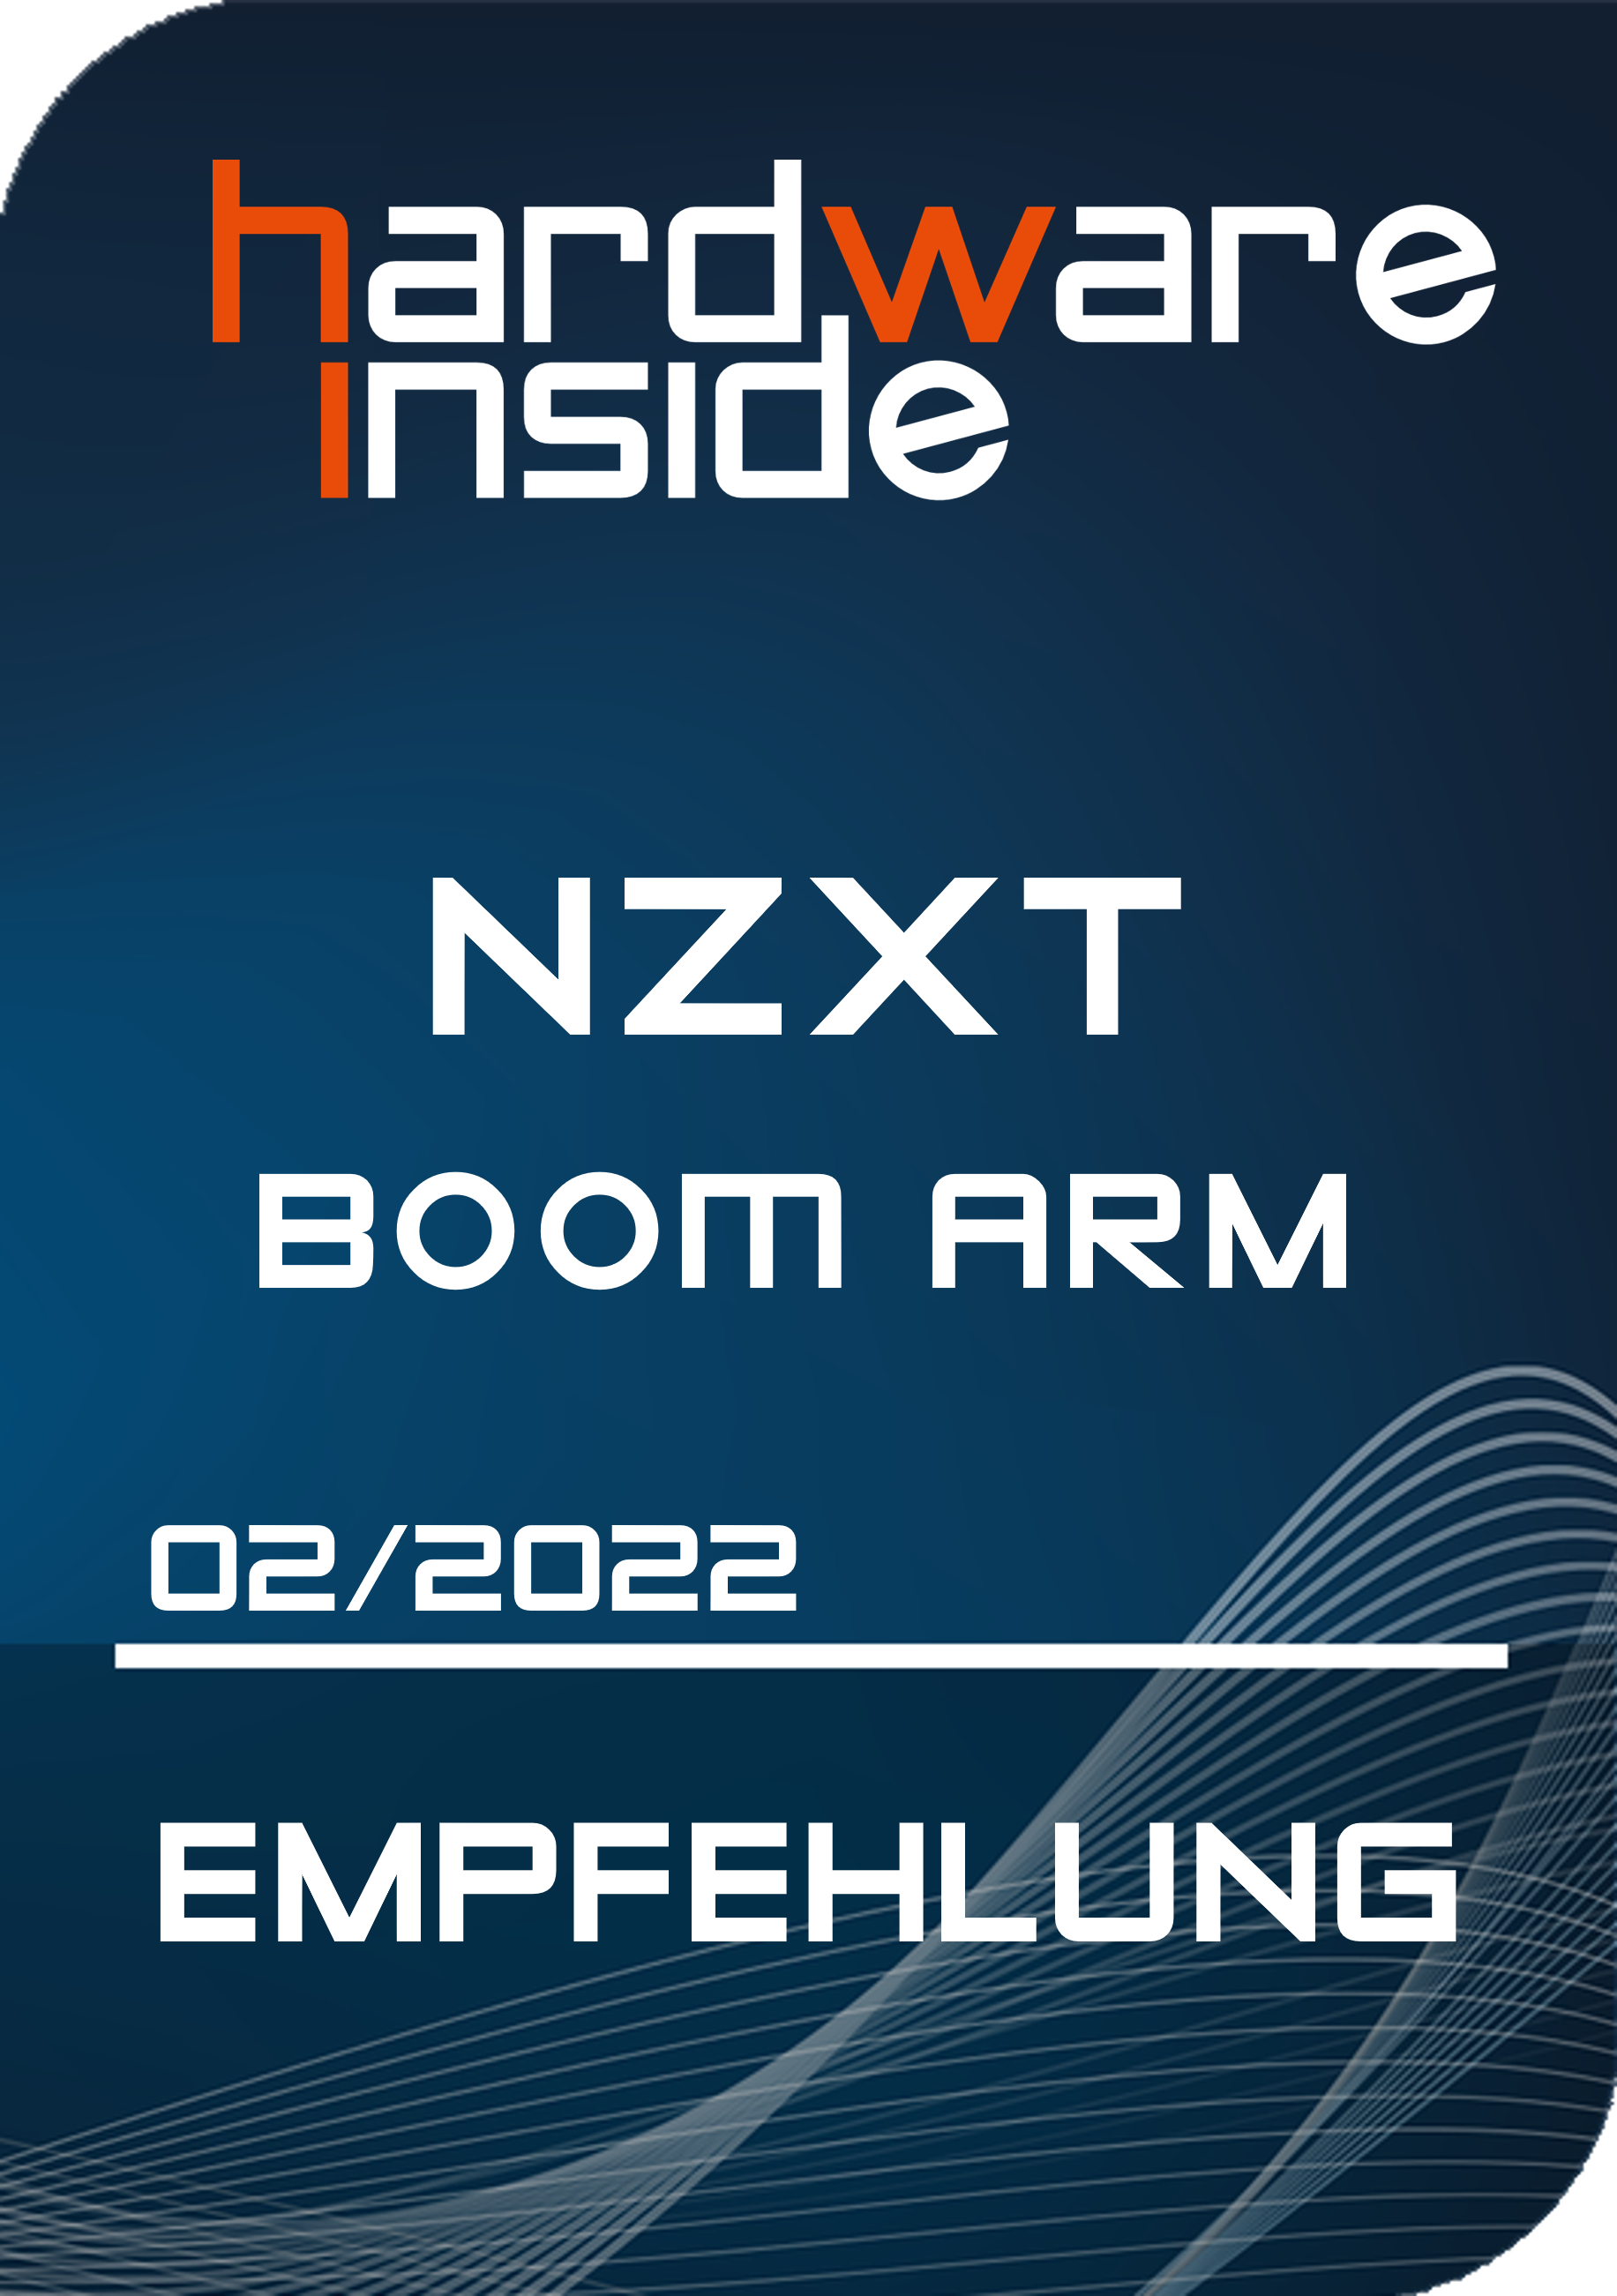 nzxt-capsule-and-boom-review-award-boom-arm-highres.png